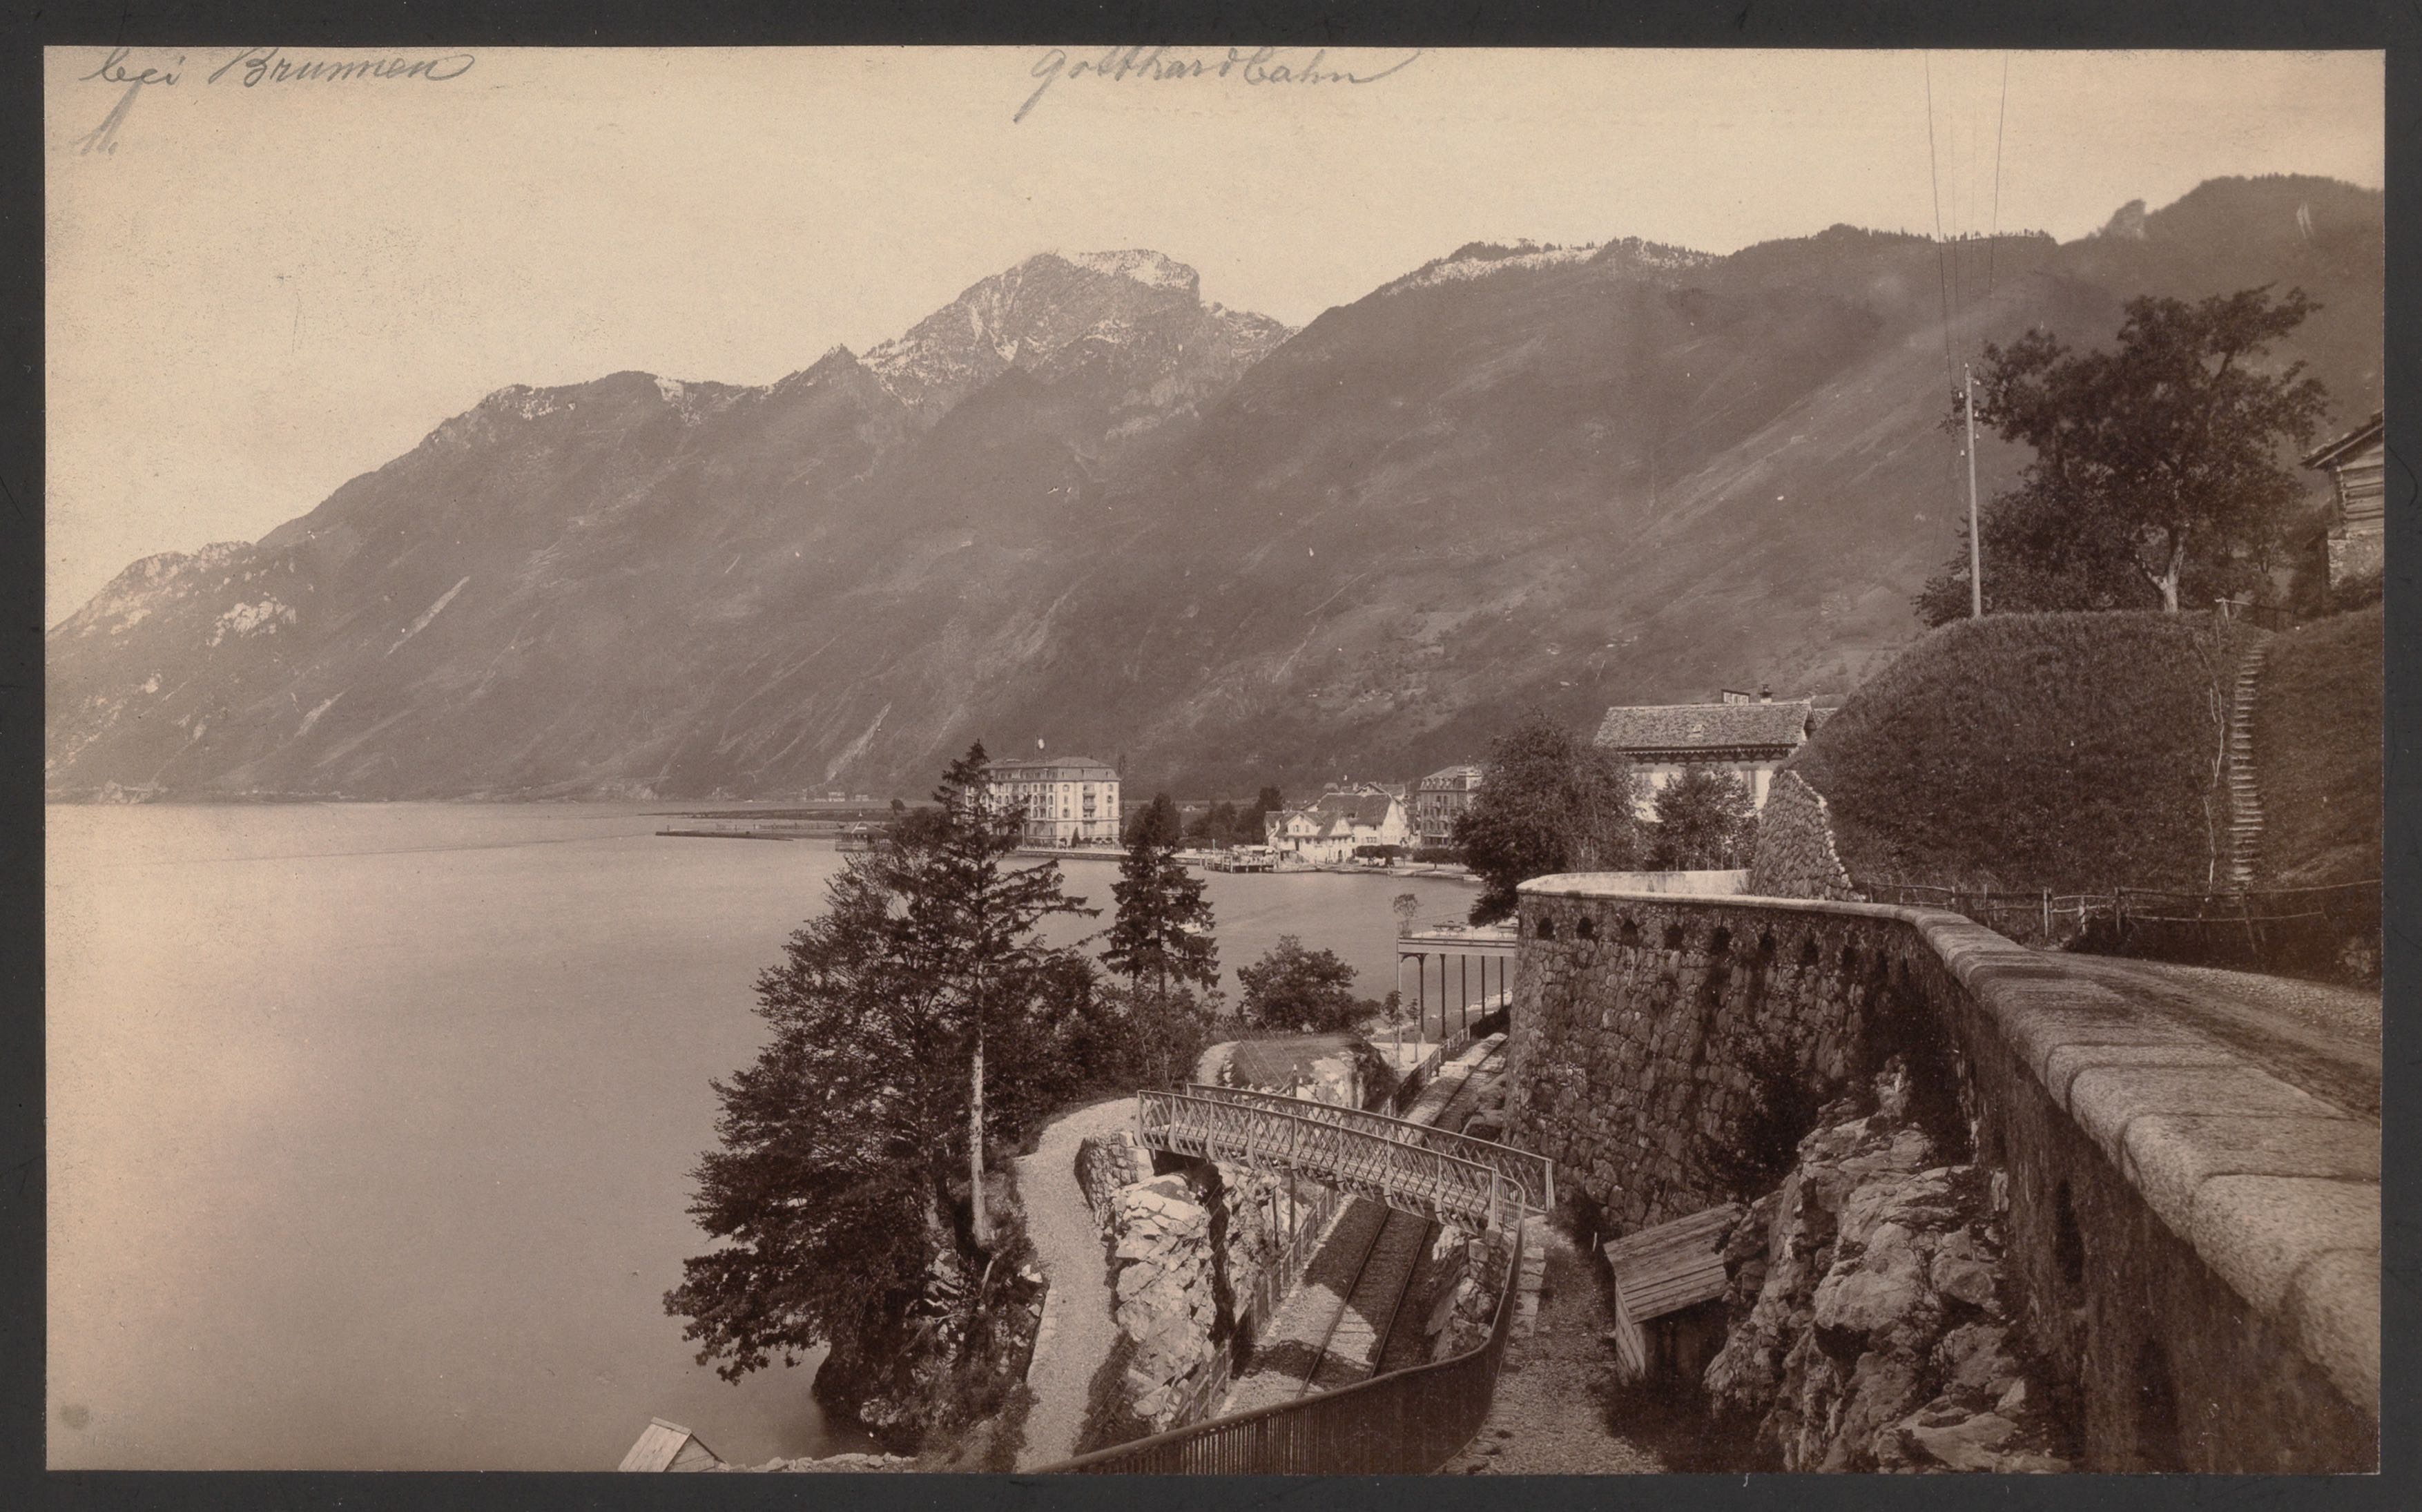 old photo of lakeside village, with train tracks in the foreground